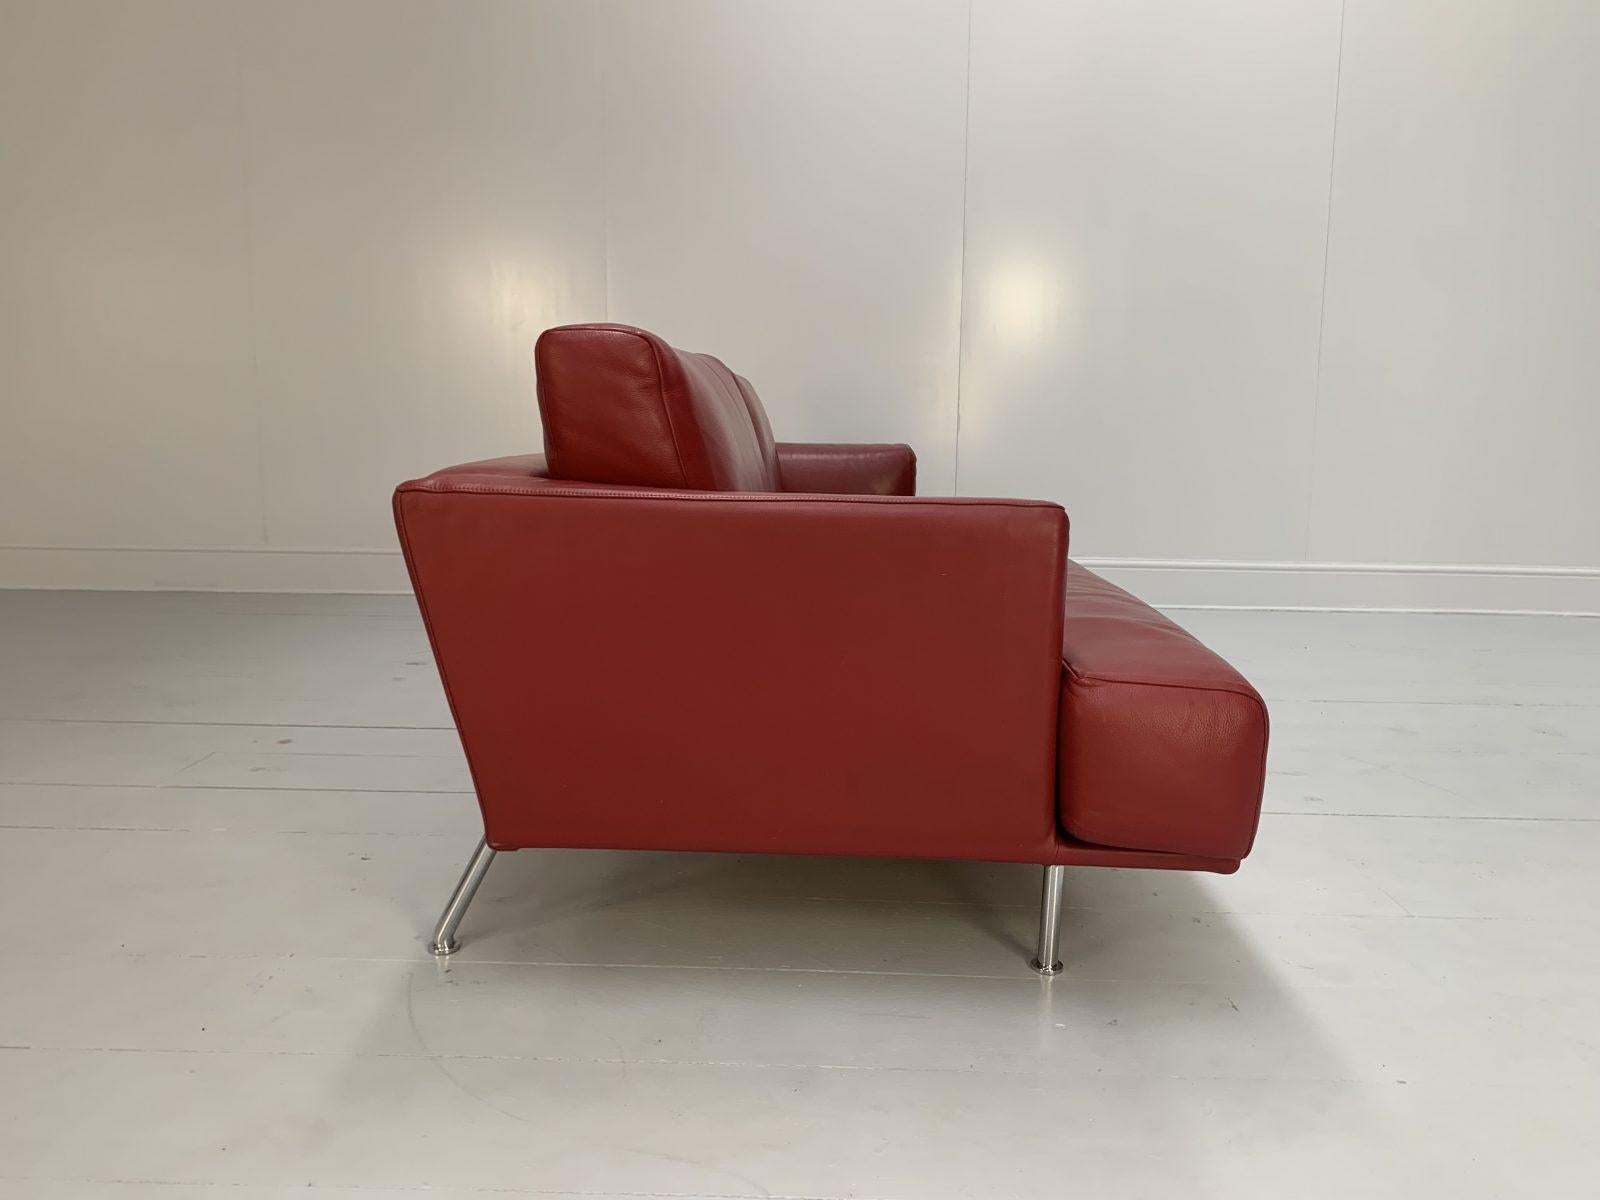 Cassina “253 Nest” 2.5-Seat Sofa & Bench Footstool – In Red “Pelle” Leather 6